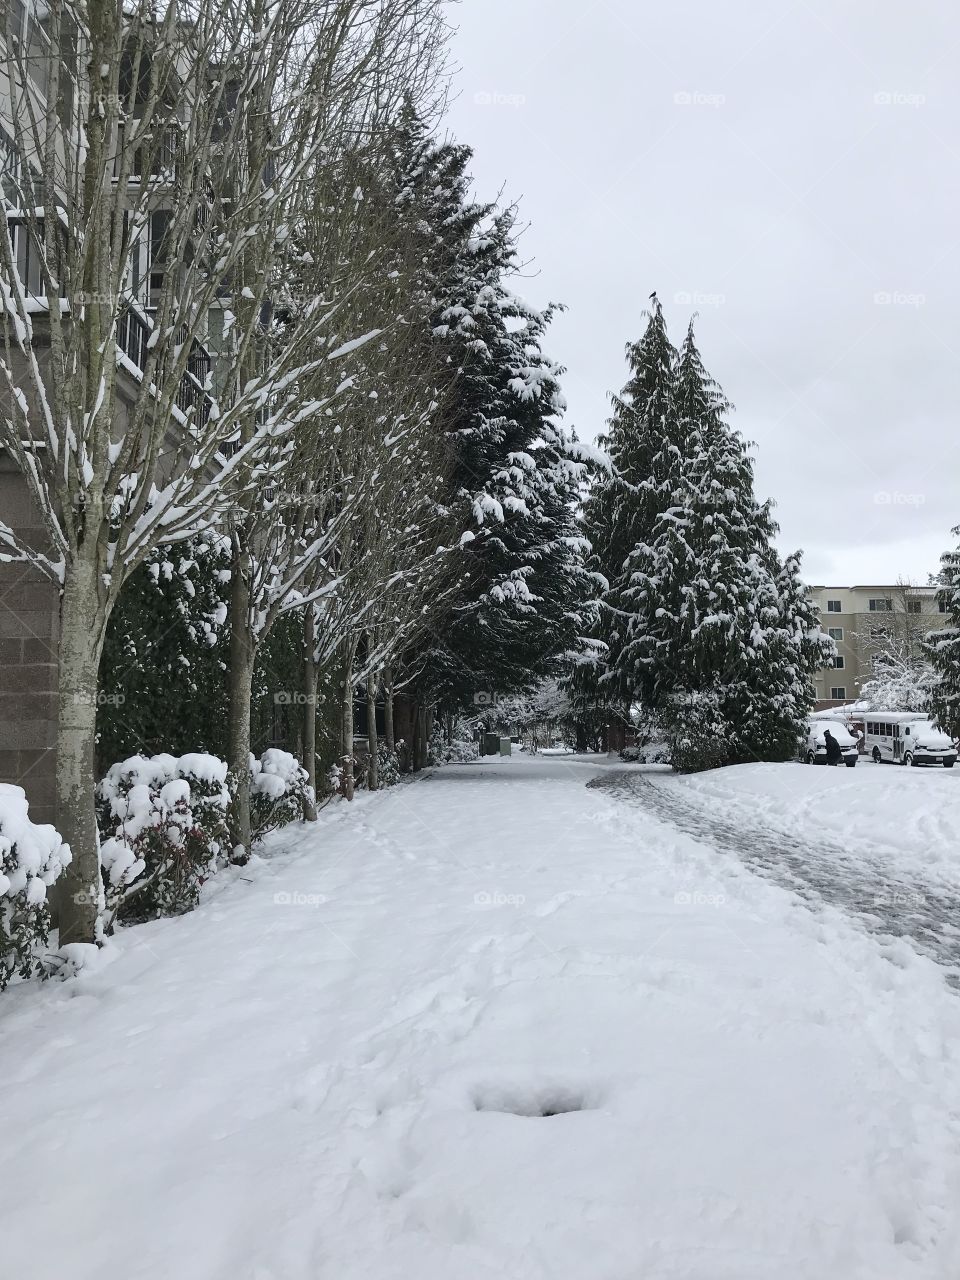 Snowy path with trees